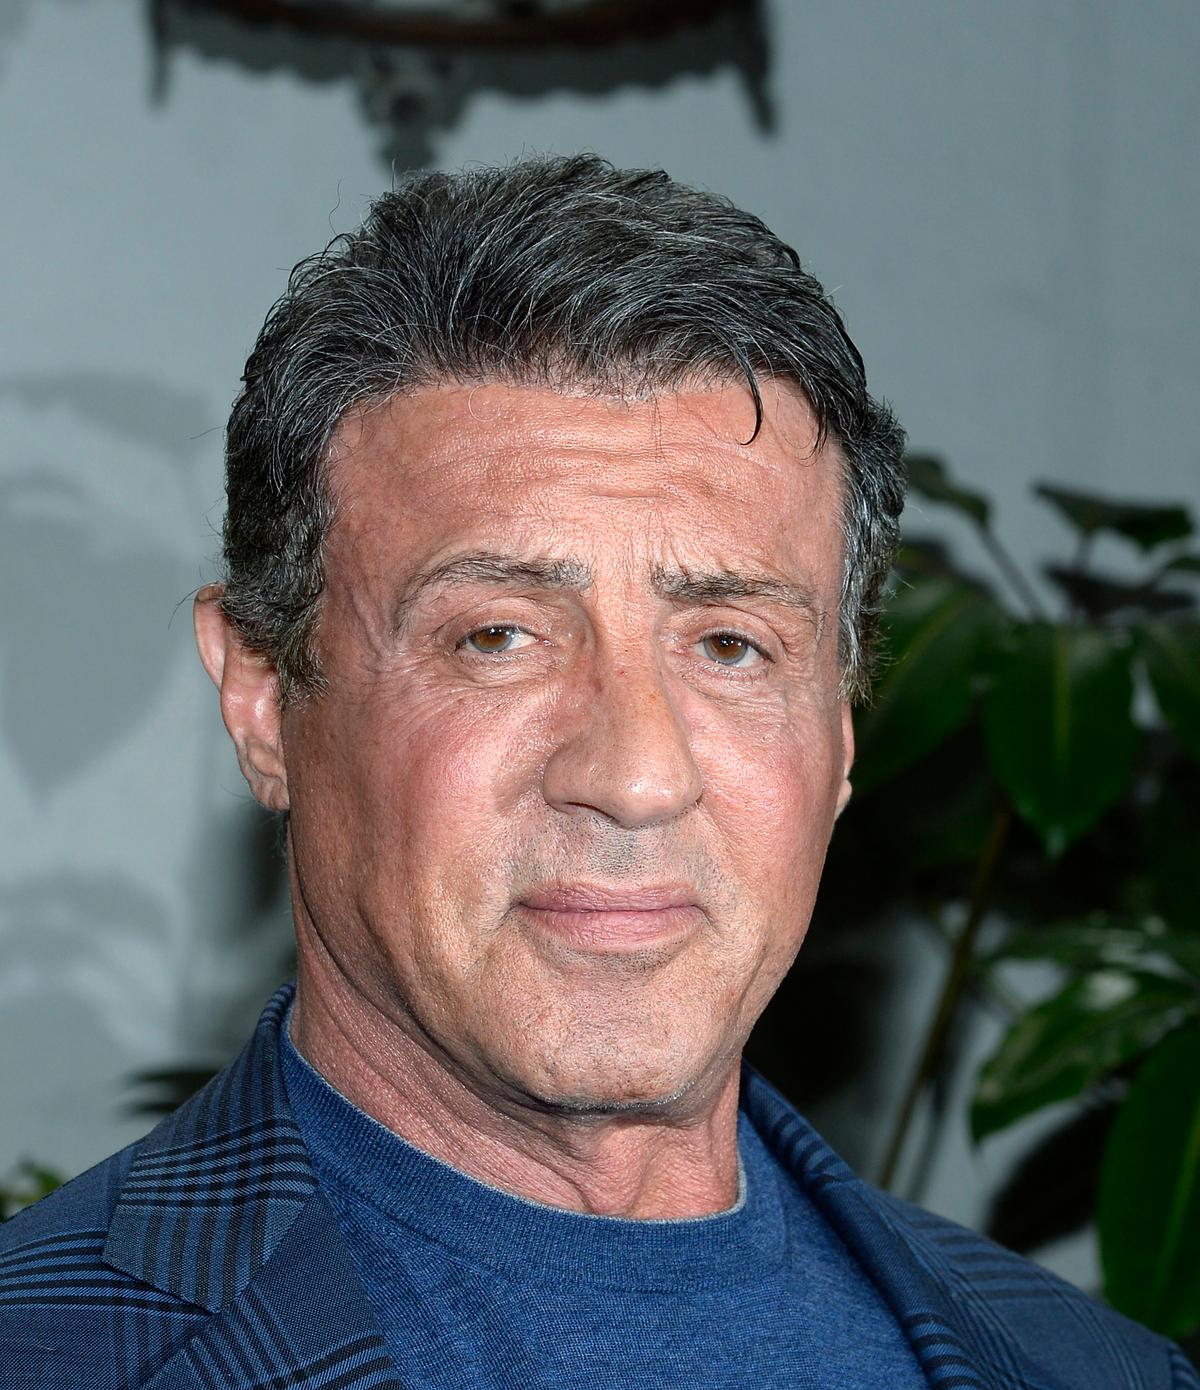 Stallone attends the Annie Leibovitz Book Launch presented by Vanity Fair at Chateau Marmont in Los Angeles on Feb. 26, 2014 (©Getty Images | <a href="https://www.gettyimages.com/detail/news-photo/actor-sylvester-stallone-attends-the-annie-leibovitz-book-news-photo/475204555?adppopup=true">Kevork Djansezian</a>)